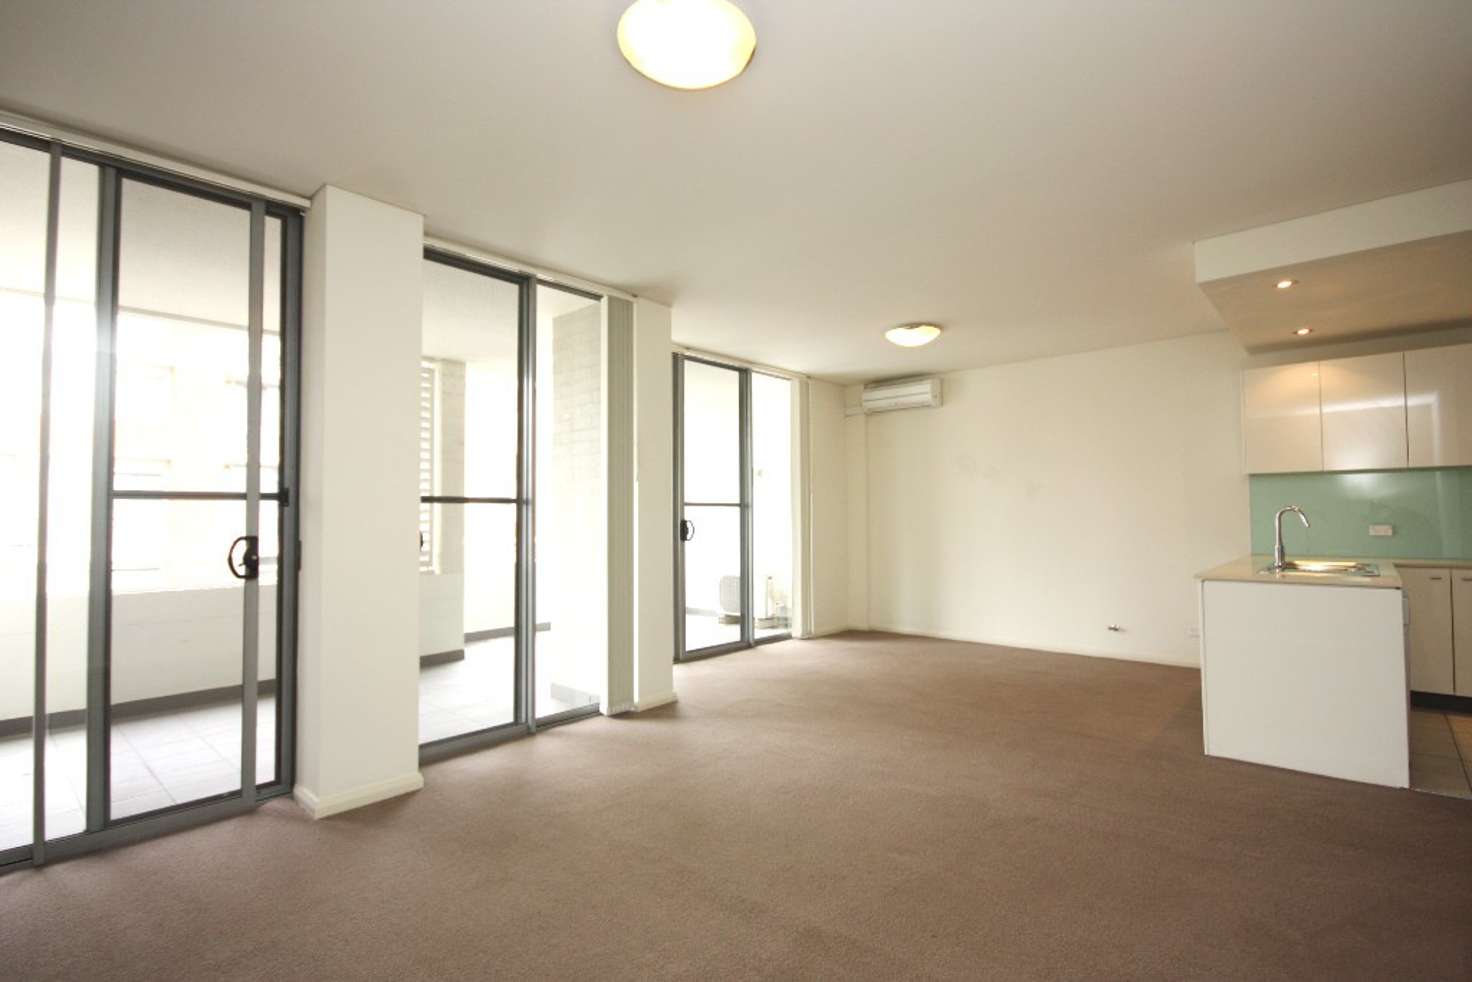 Main view of Homely unit listing, 306/3 Stromboli Strait, Wentworth Point NSW 2127